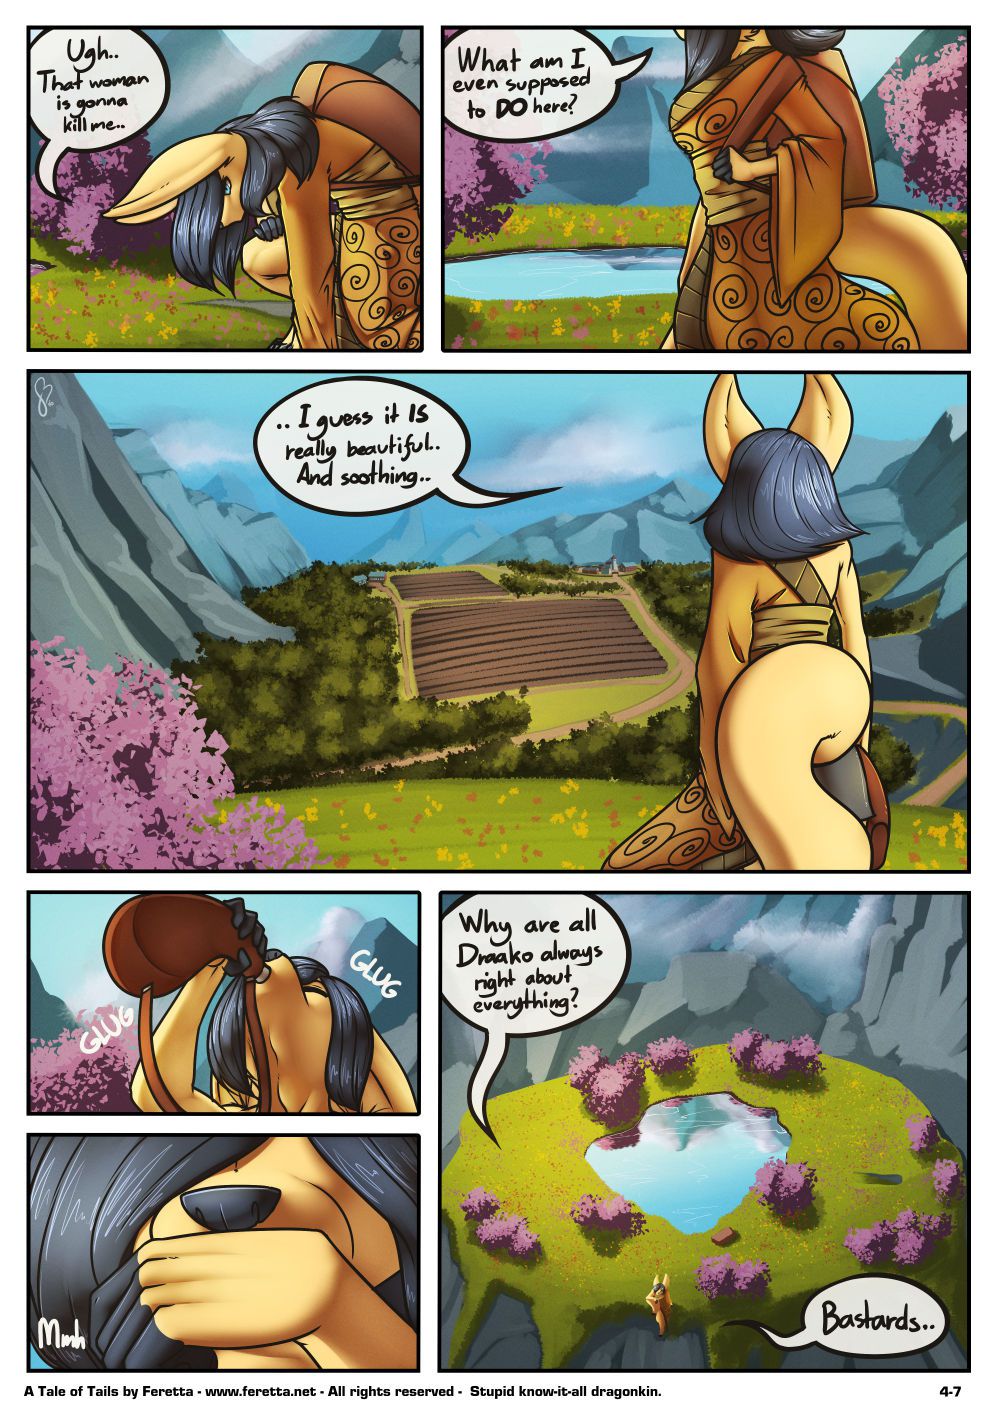 [Feretta] A Tale of Tails: Chapter 4 -  Matters of the mind [Ongoing] 7